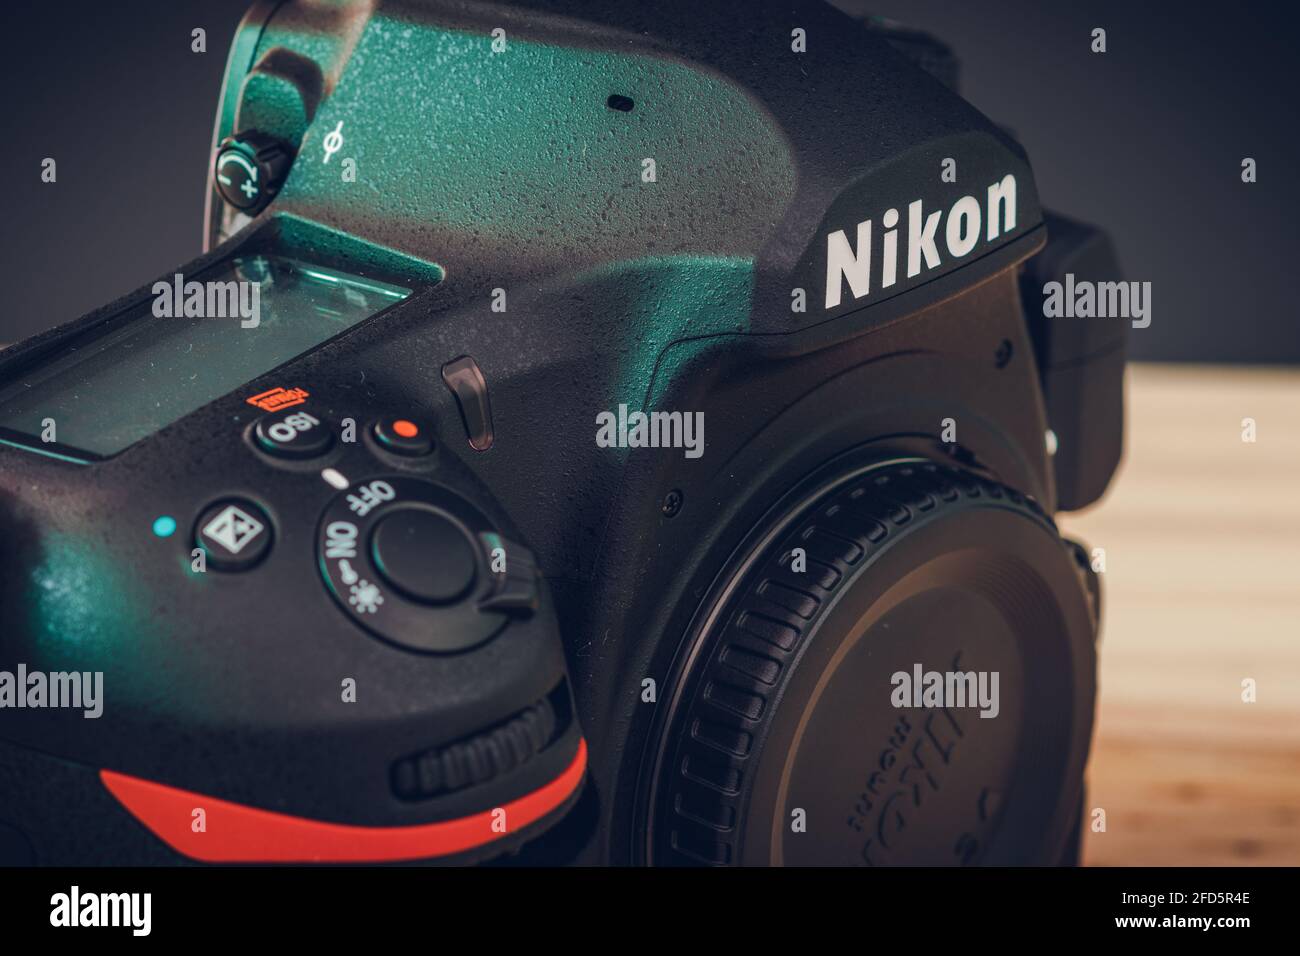 Galle, Sri Lanka - 02 17 2021: Nikon D850 DSLR body with camera body cap, top LCD display, and front dials and on off switch close up. Modern professi Stock Photo